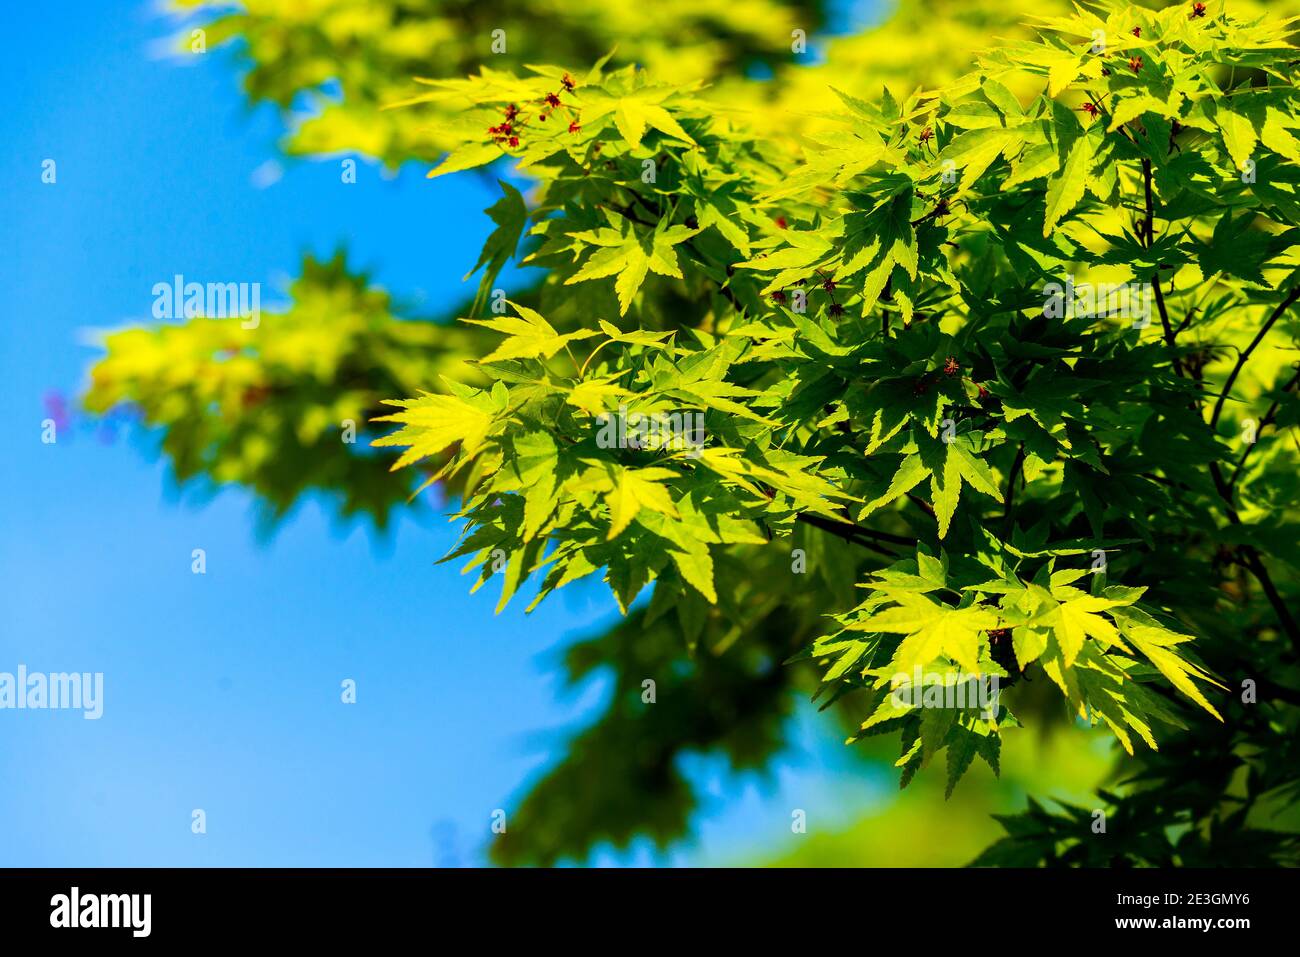 Acer palmatum or Palm-shaped maple budding in the spring. Leaves of tree on sunlight. Stock Photo